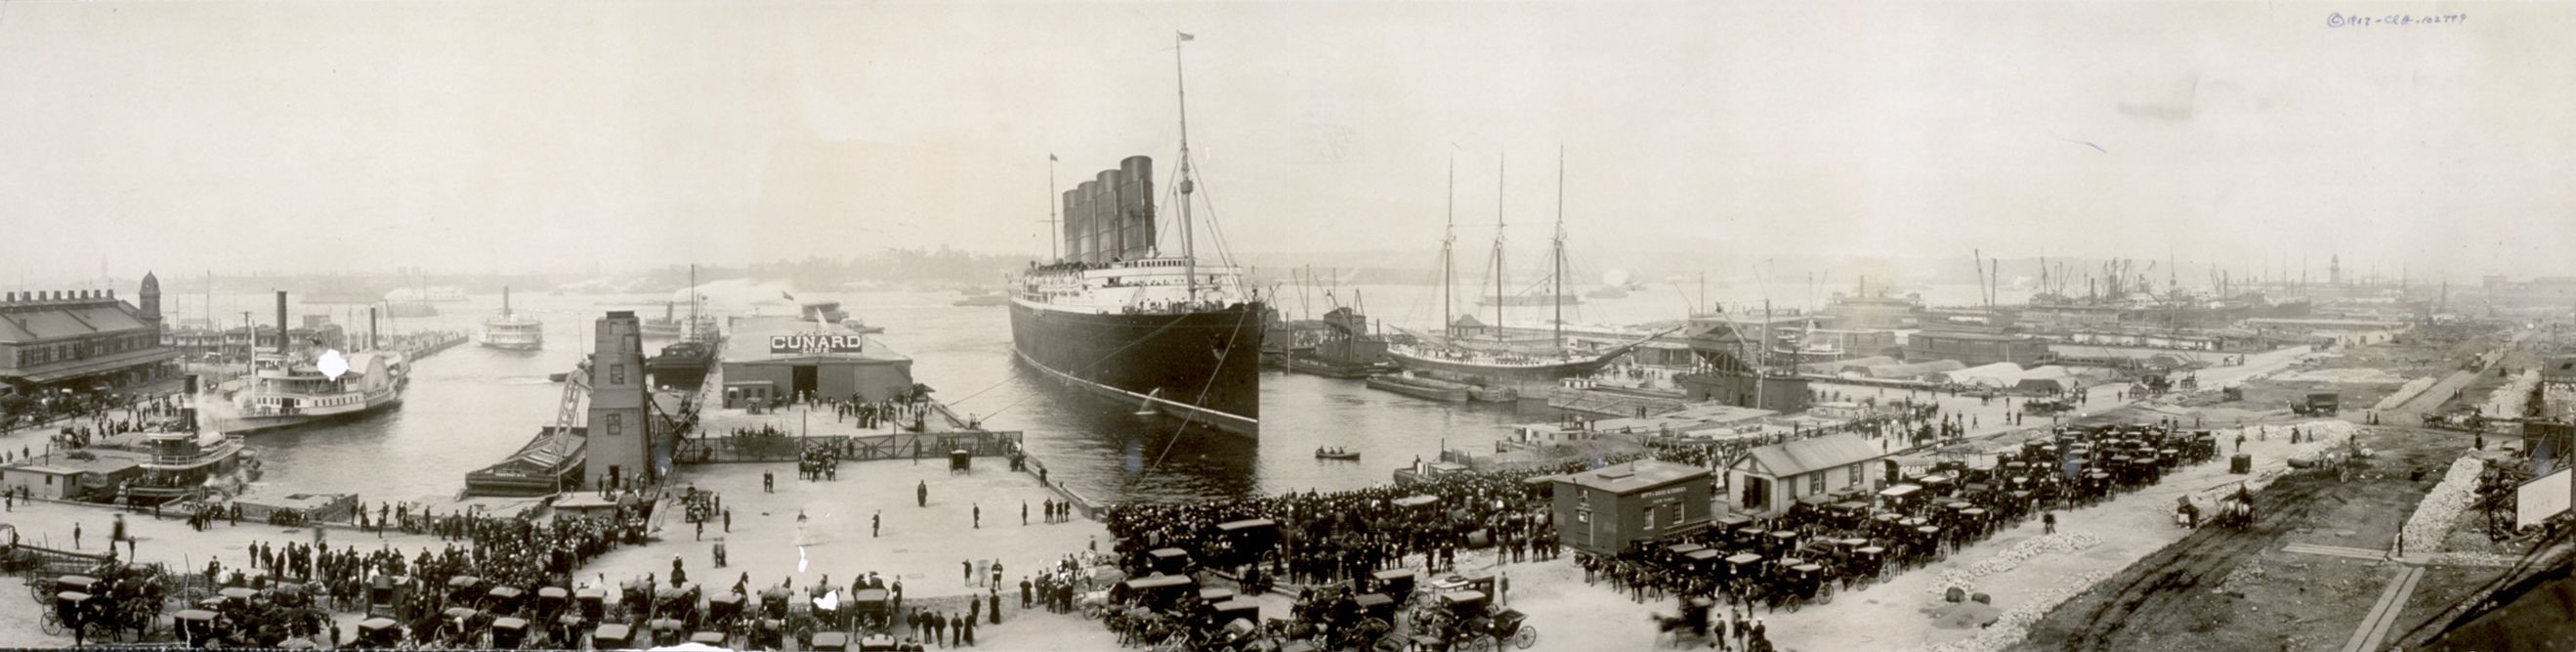 The_Lusitania_at_end_of_record_voyage_1907